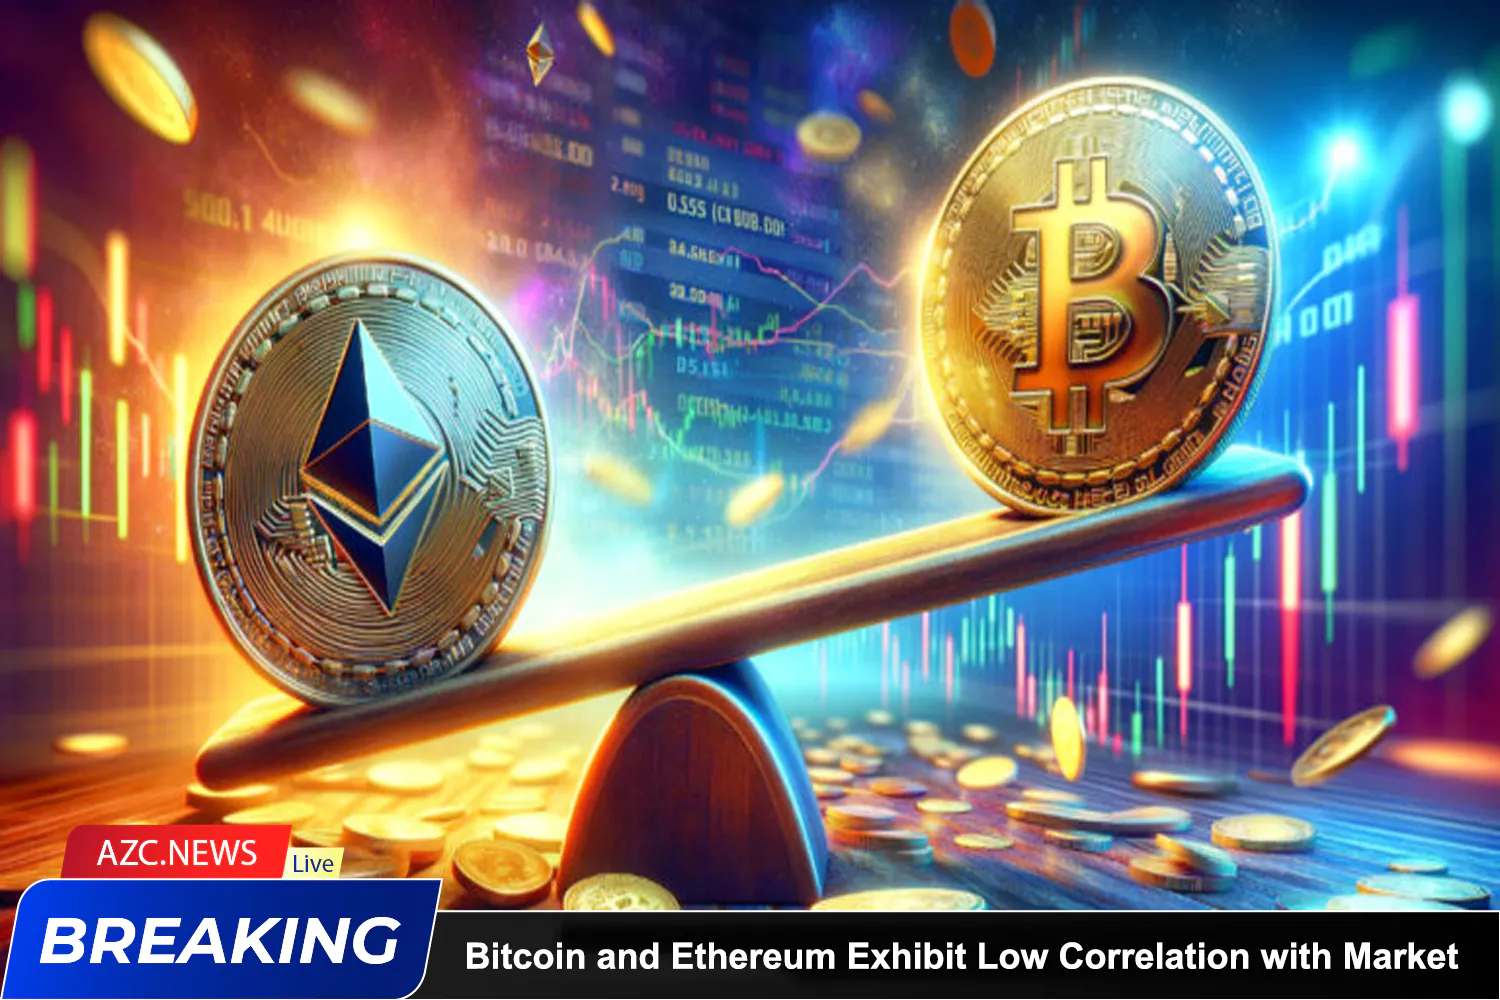 Azcnews Bitcoin And Ethereum Exhibit Low Correlation With Market